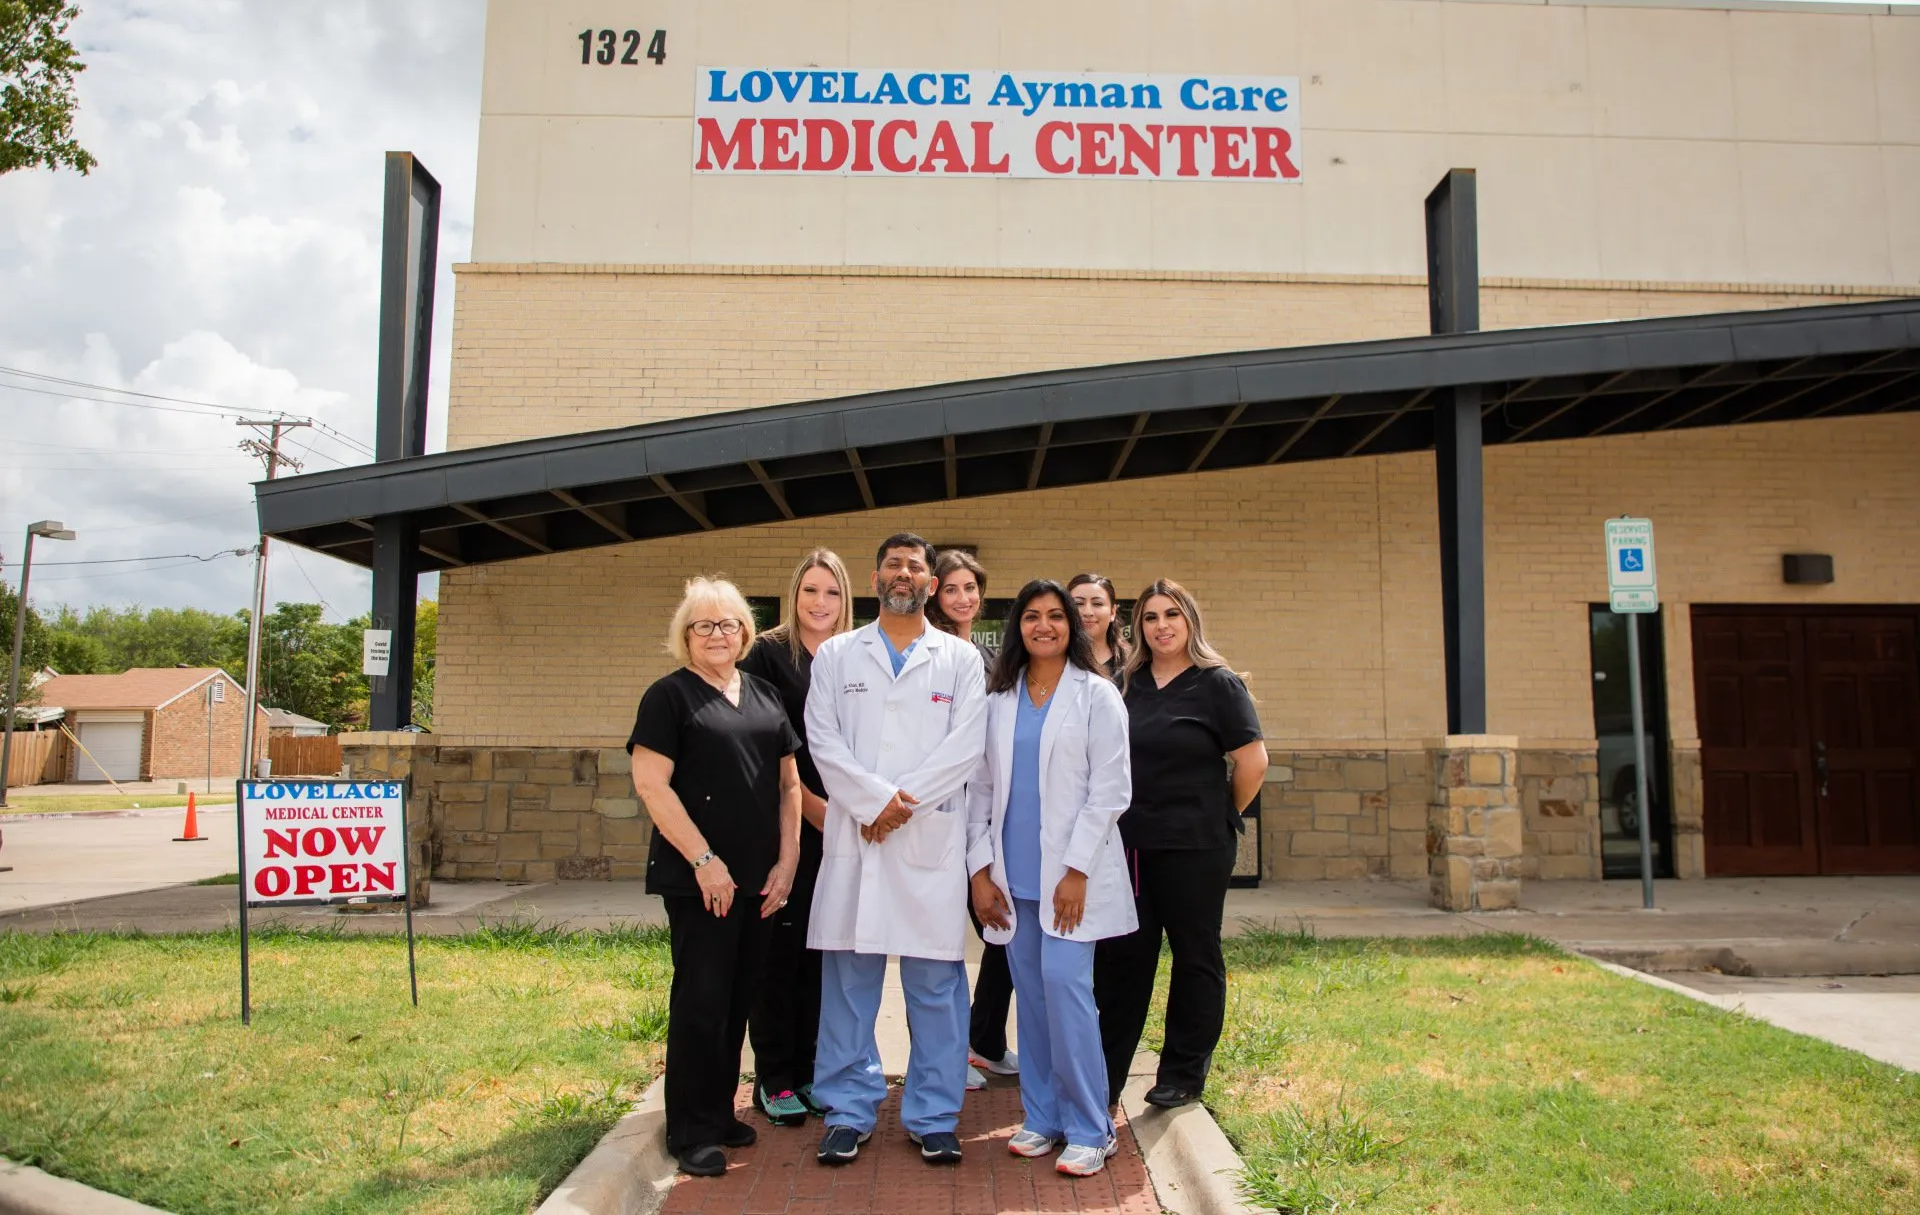 a group of people standing in front of a medical center